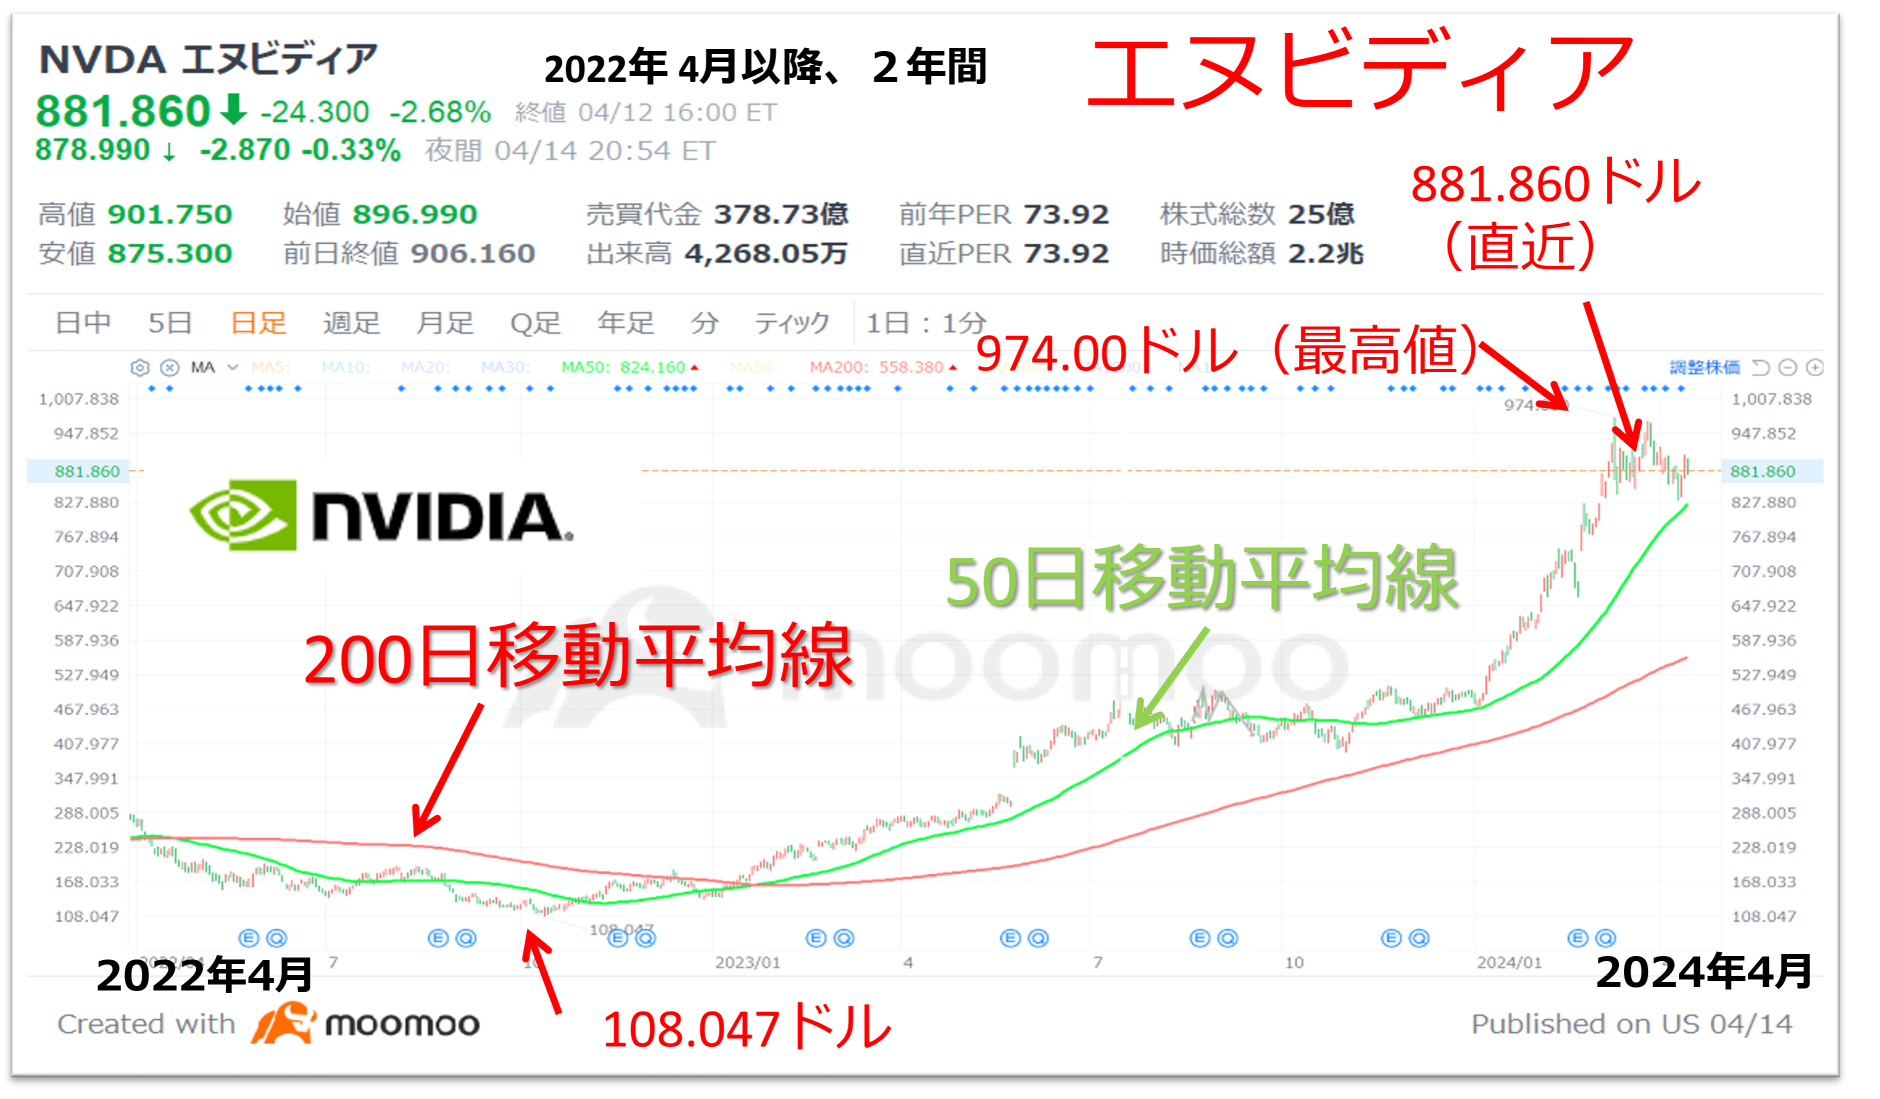 “NVIDIA's outlook and stock price analysis”